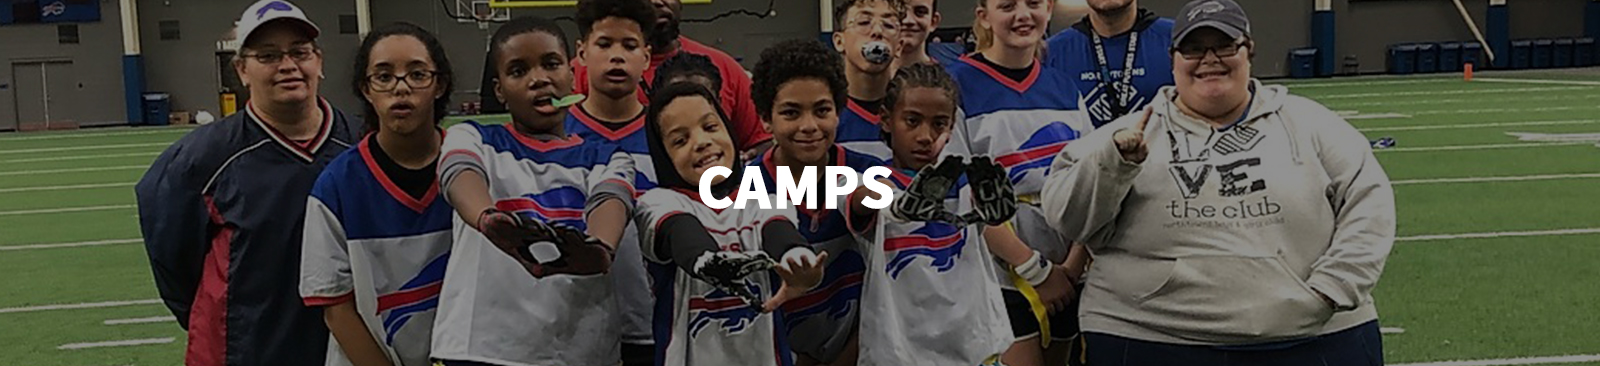 Boys and Girls Clubs of the Northtowns Summer Camps